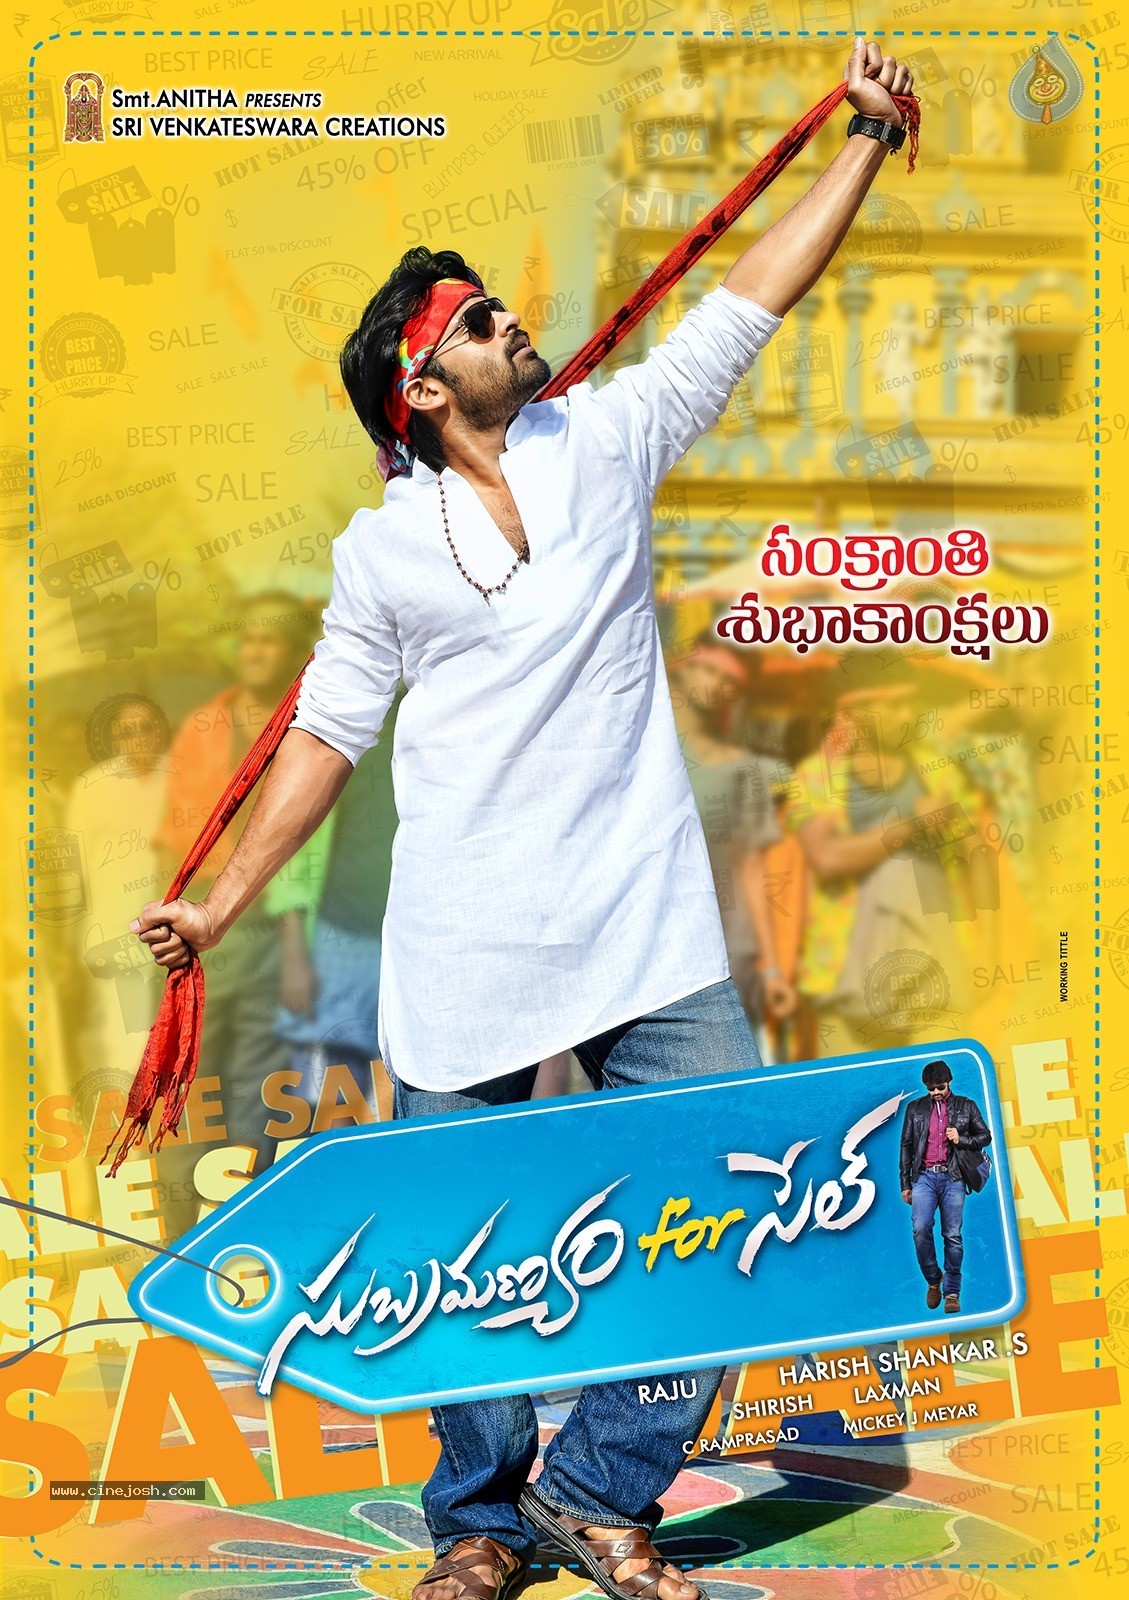 Subramanyam For Sale Posters - 2 / 2 photos